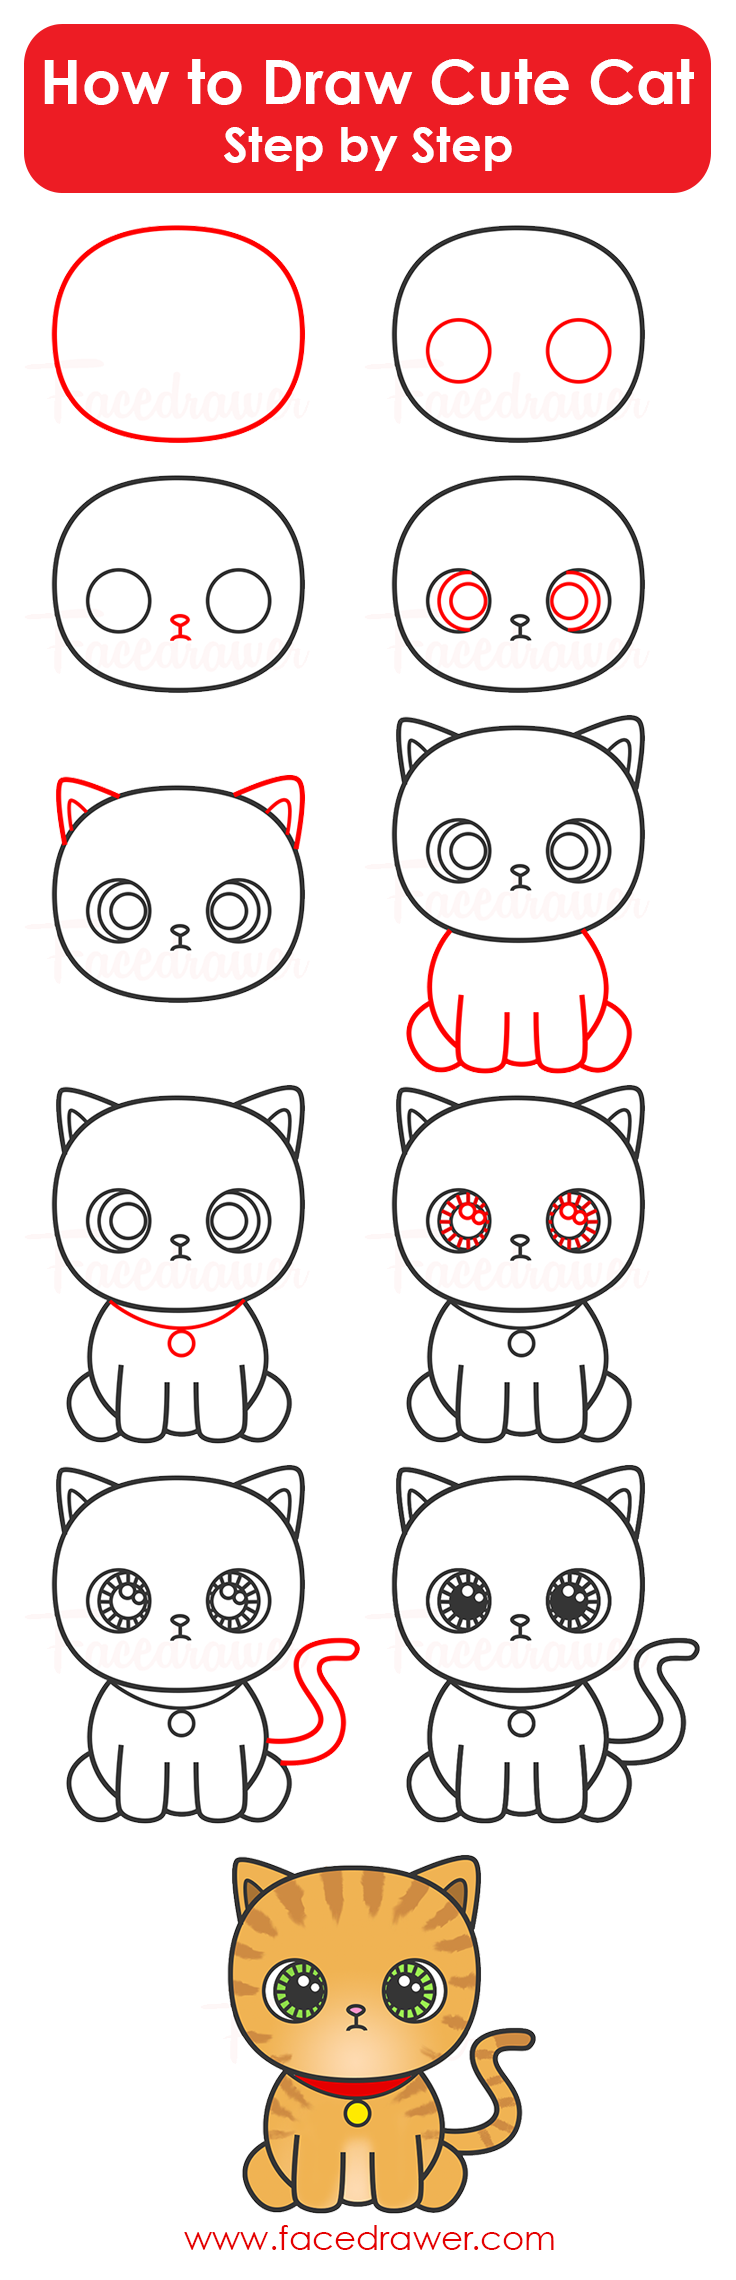 how to draw cute cat step by step infographic | Facedrawer